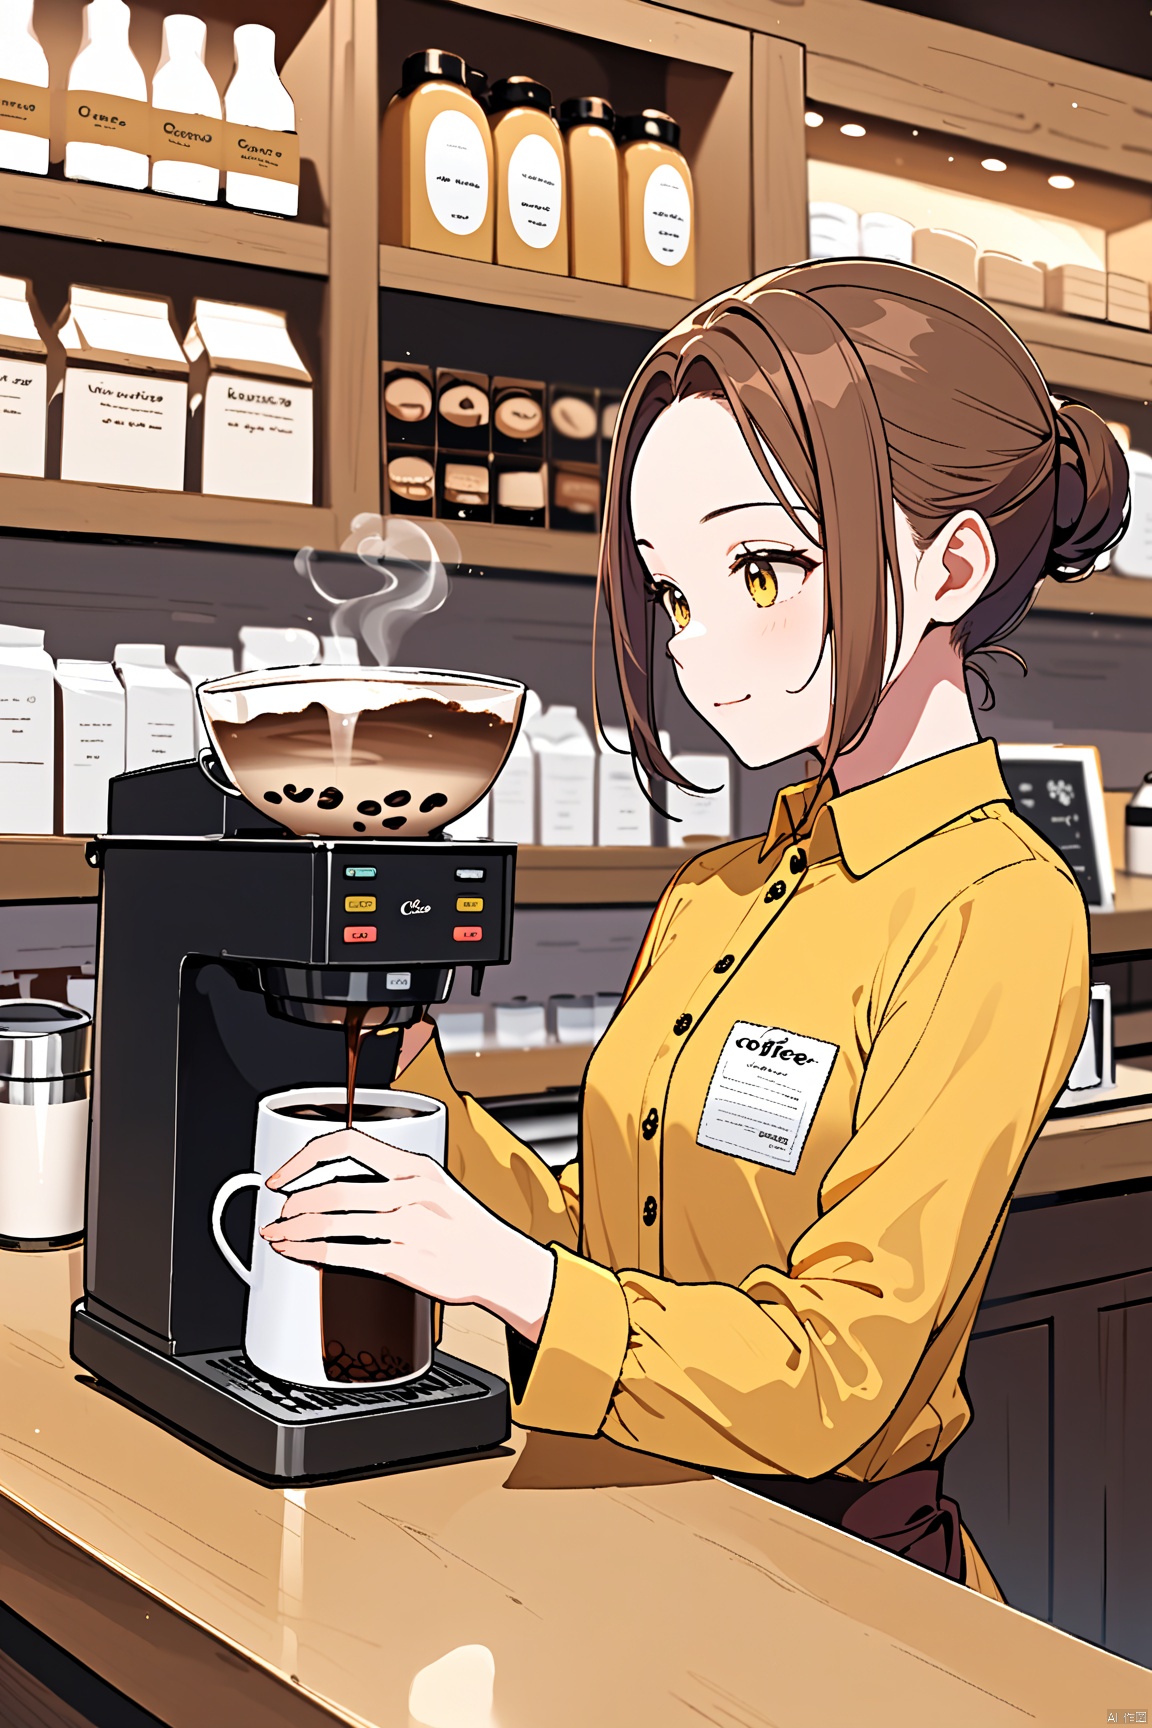  A clerk with yellow shirt in a coffee shop is making coffee